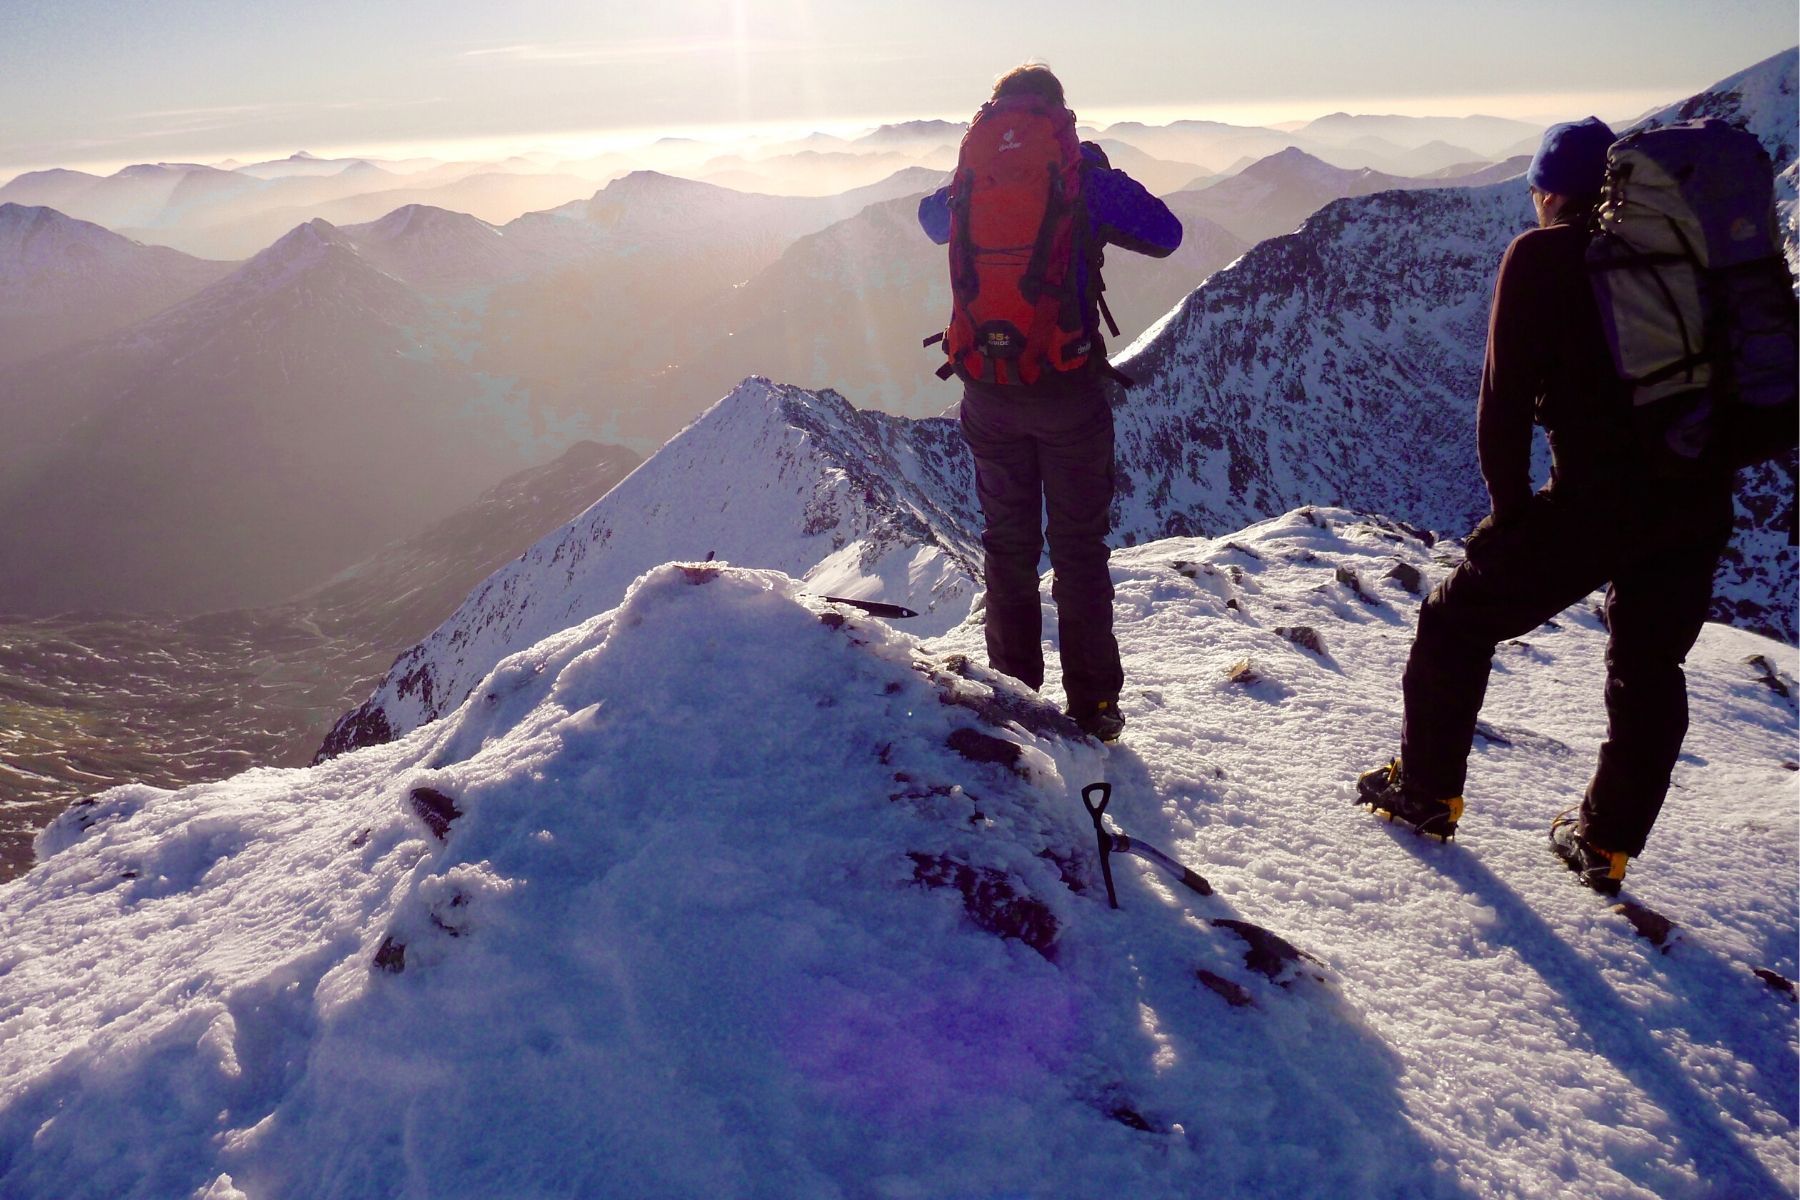 Who is the Winter Mountaineering Course for?